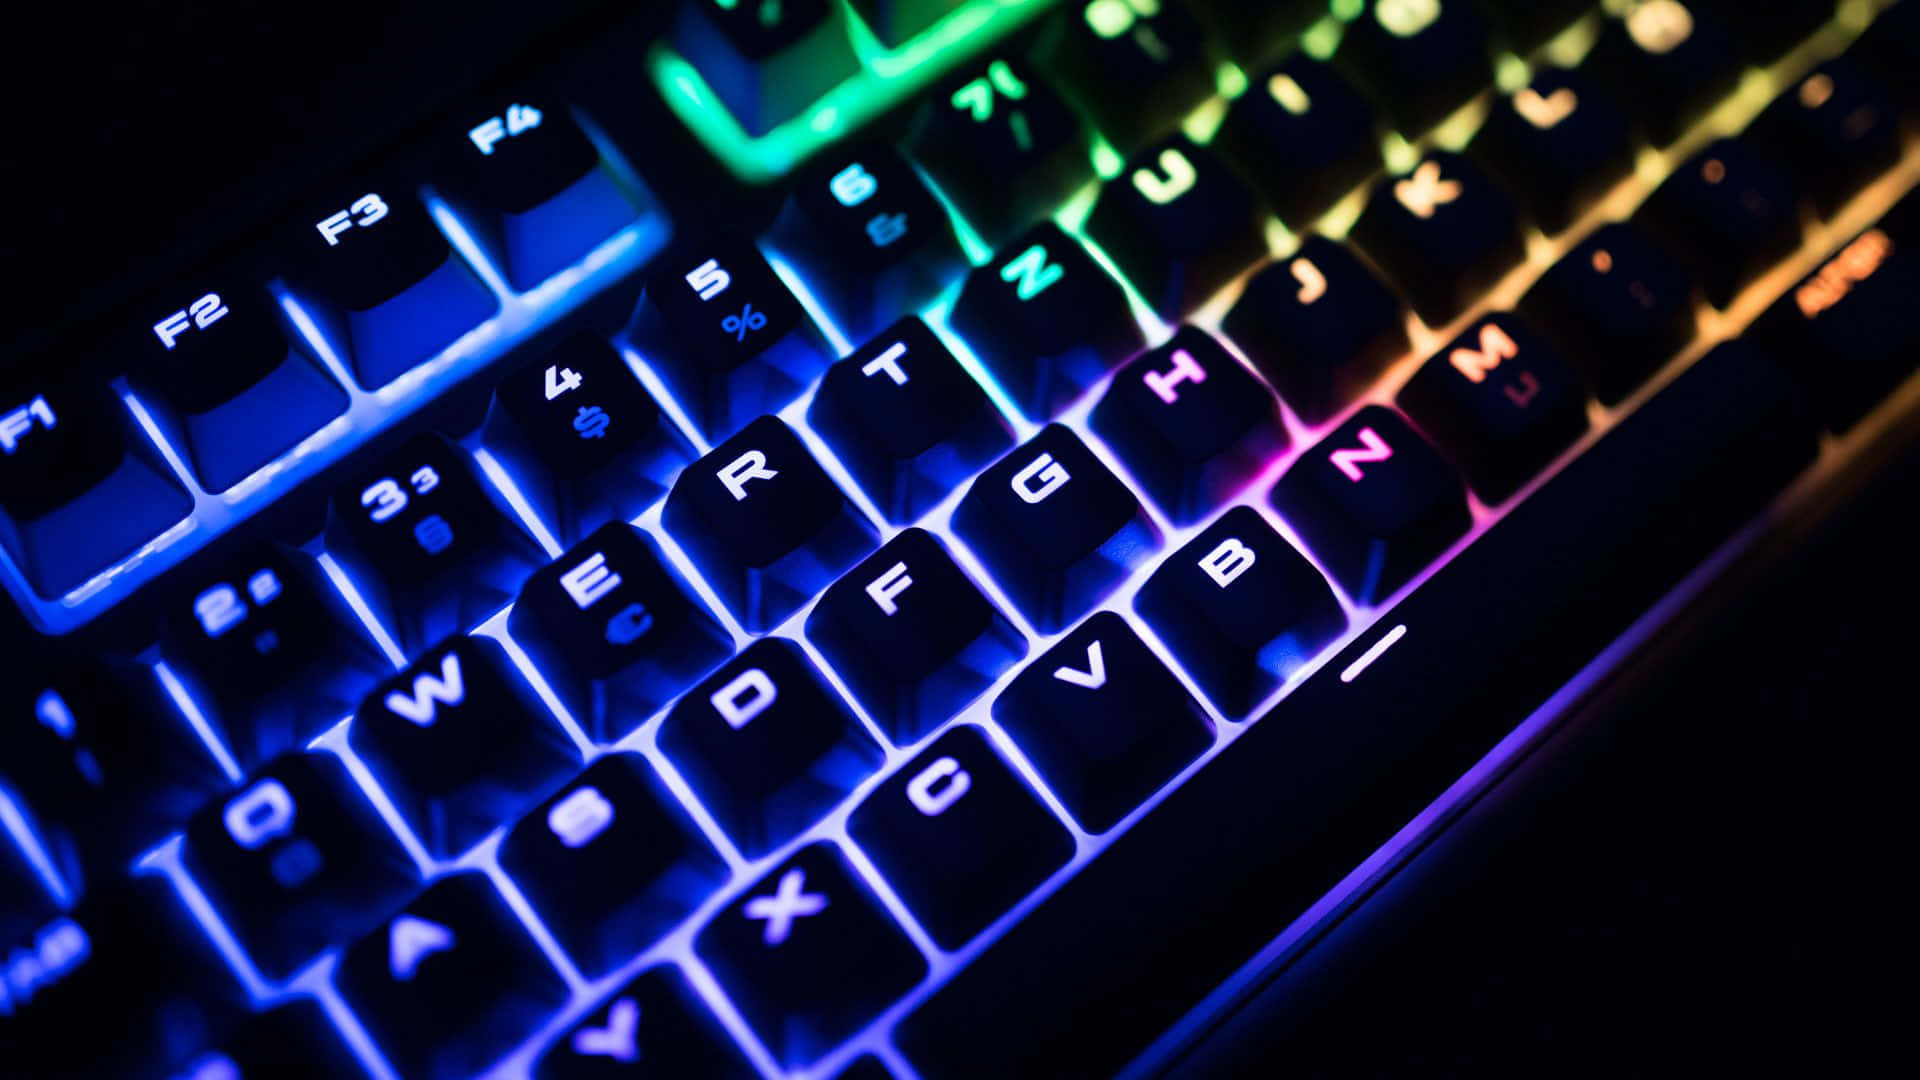 Take your gaming experience to the next level with a gaming keyboard Wallpaper